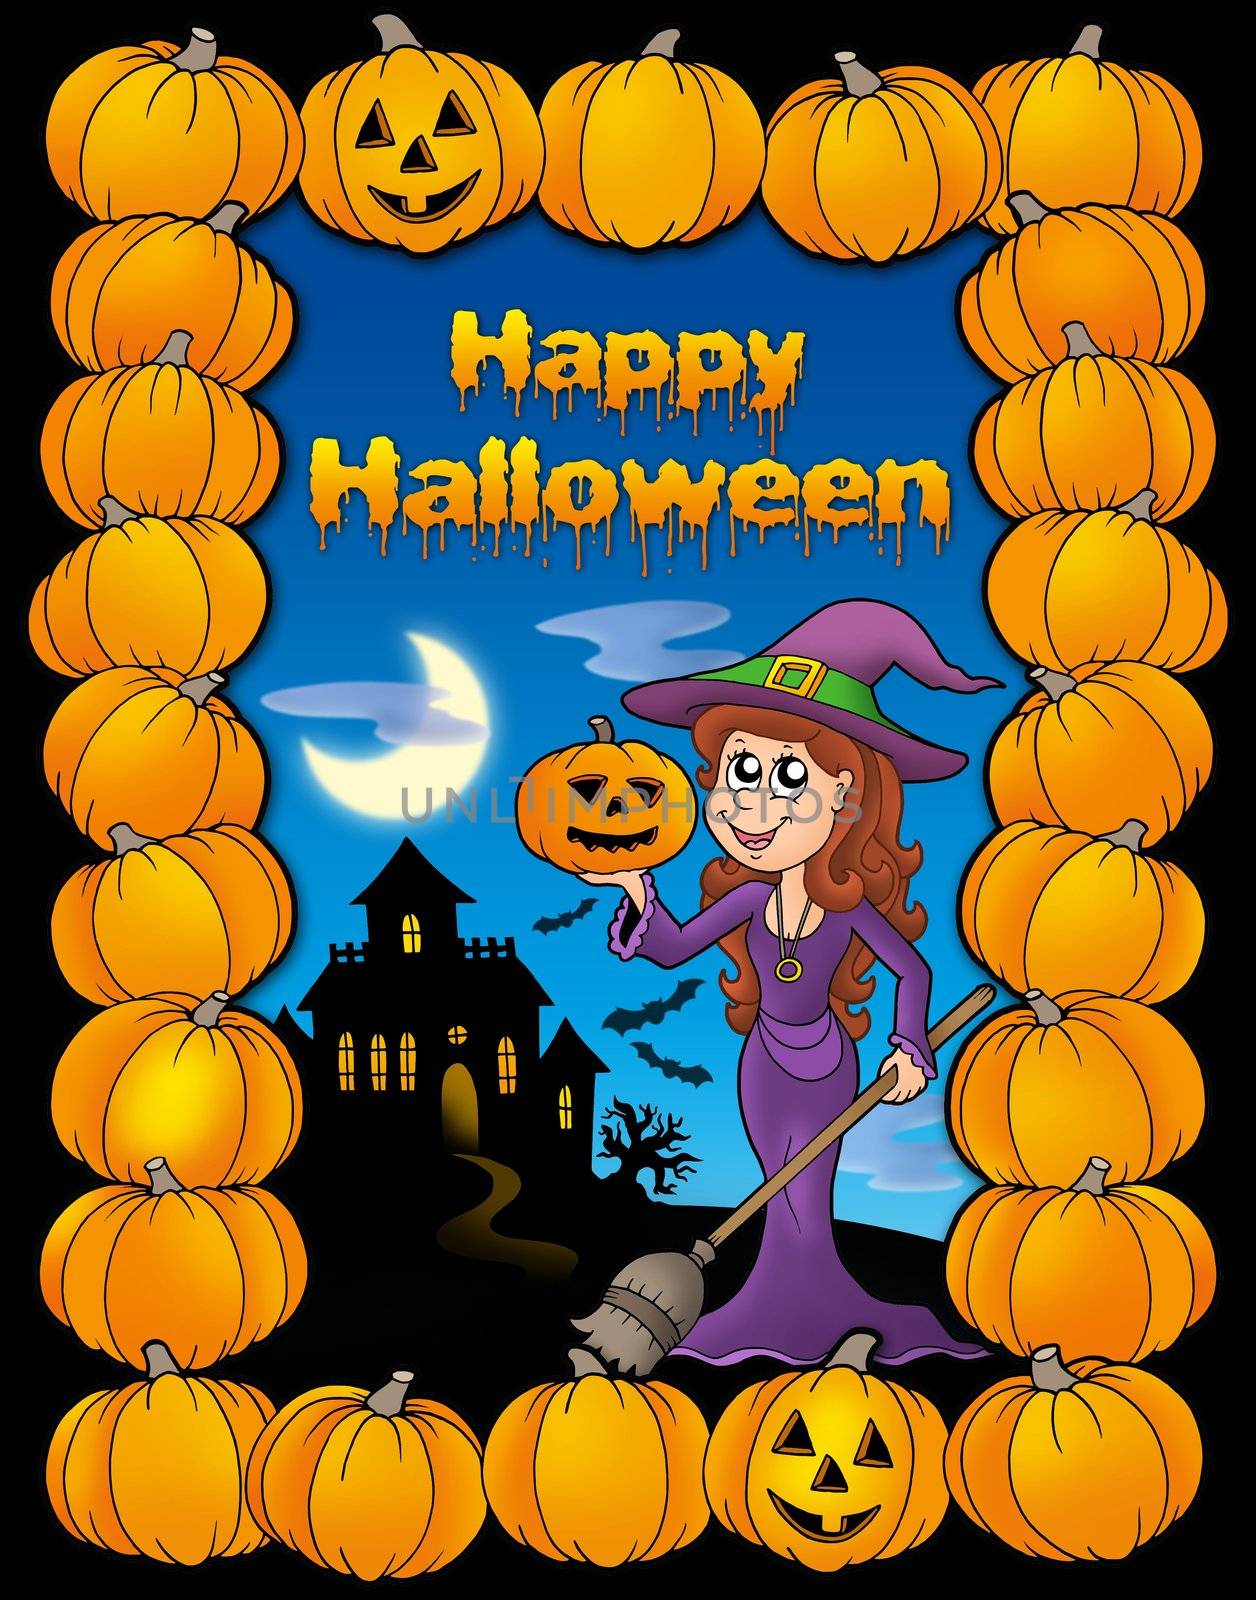 Happy Halloween card by clairev